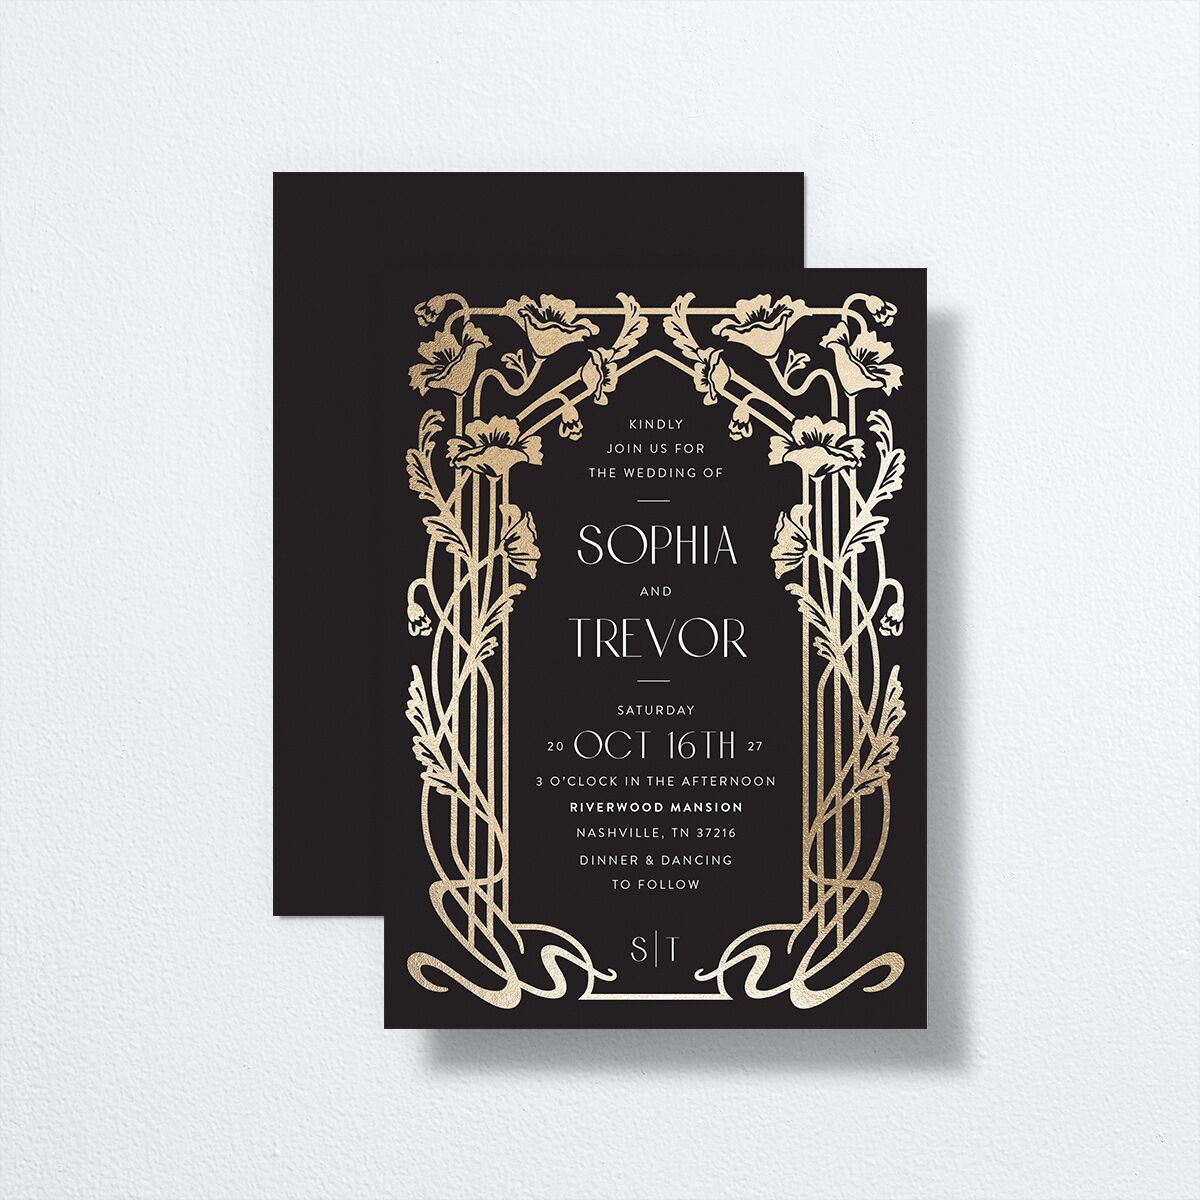 Gilded Nouveau Wedding Invitations front-and-back in black